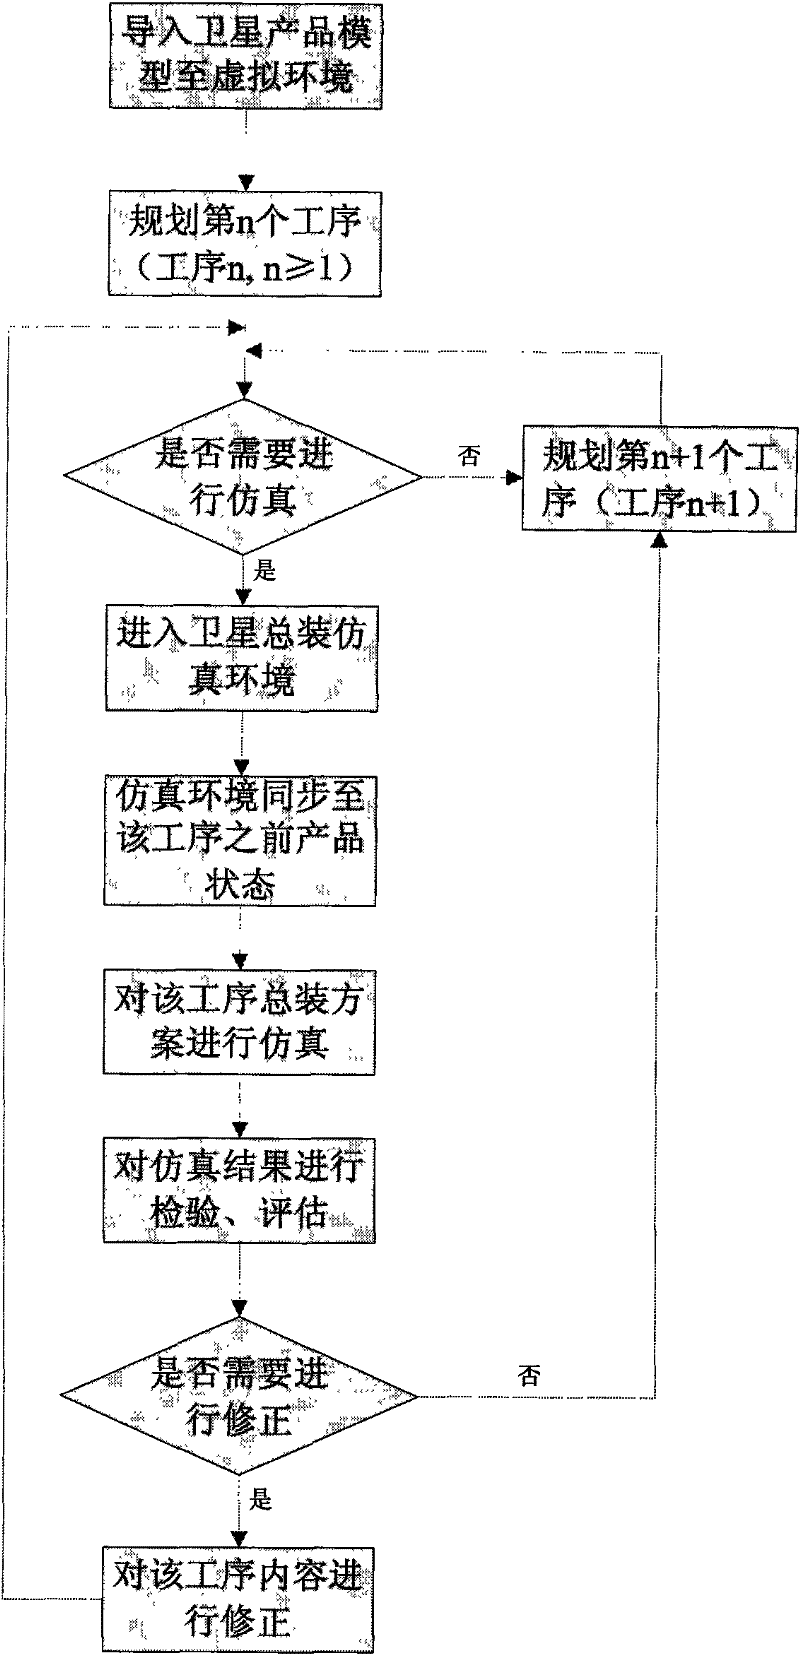 Two-dimensional three-dimensional combined satellite general assembly process planning and simulation method